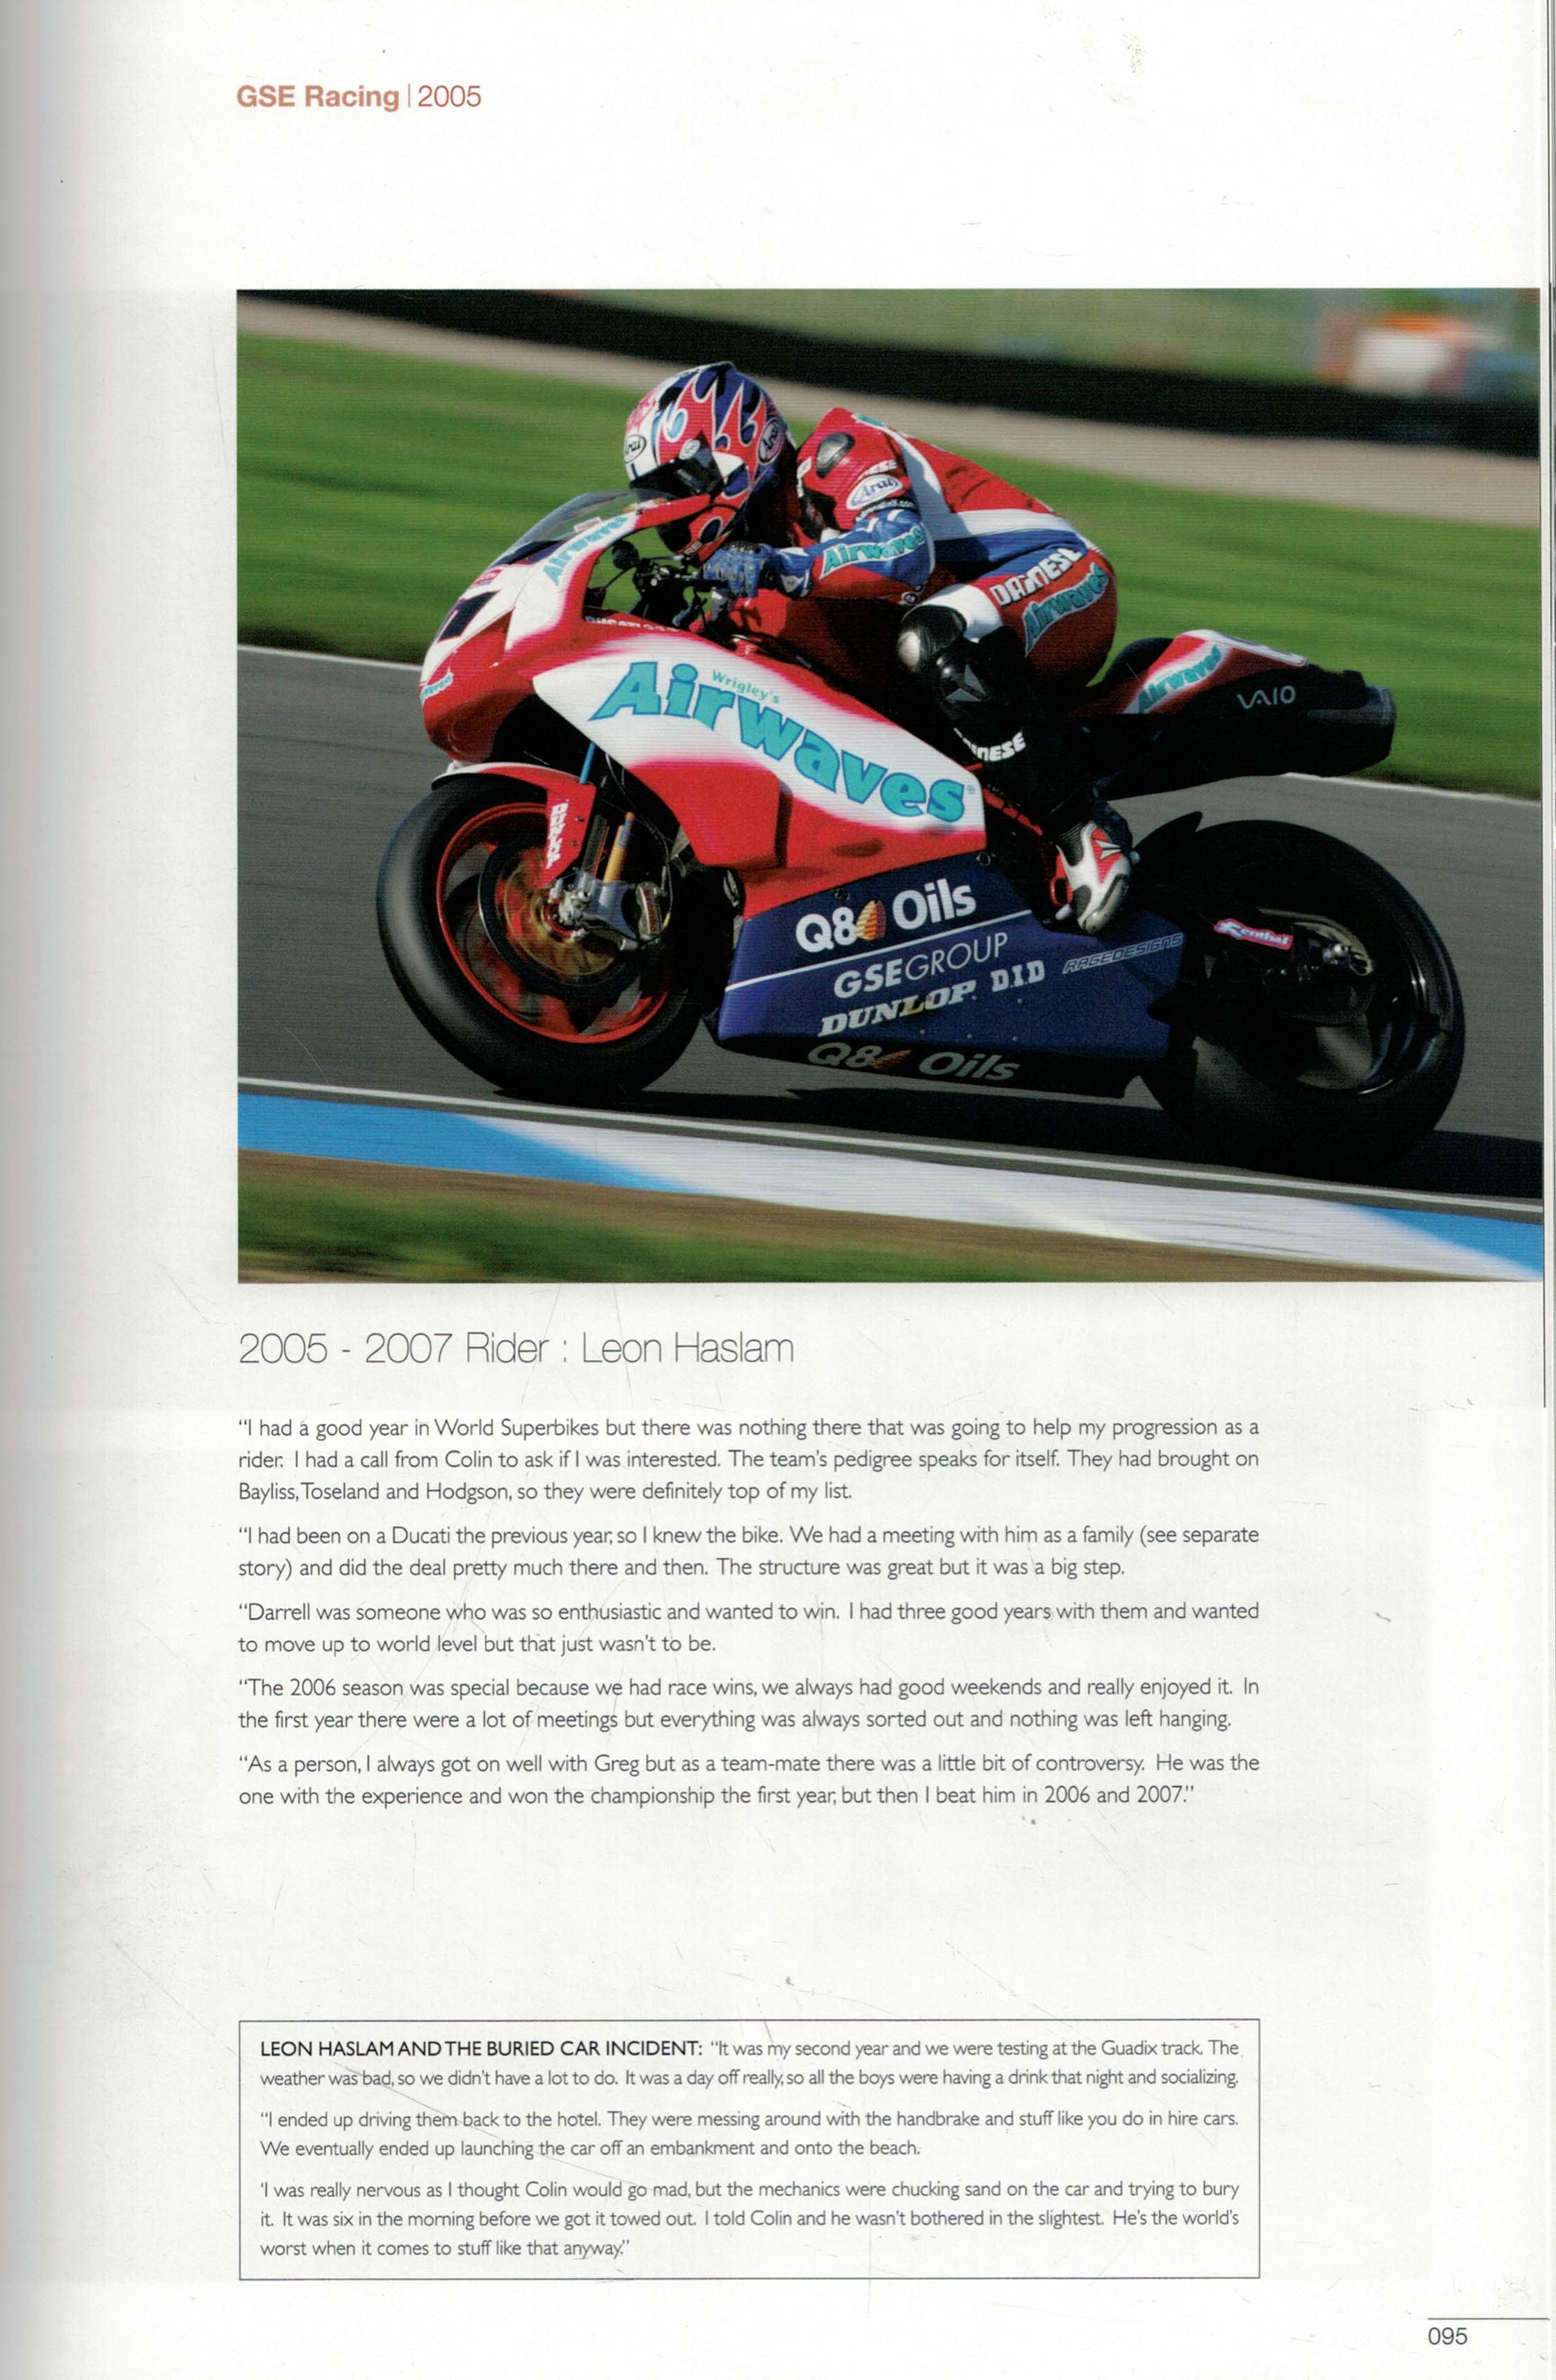 From Diggers to Ducatis. A History of GSE Racing.